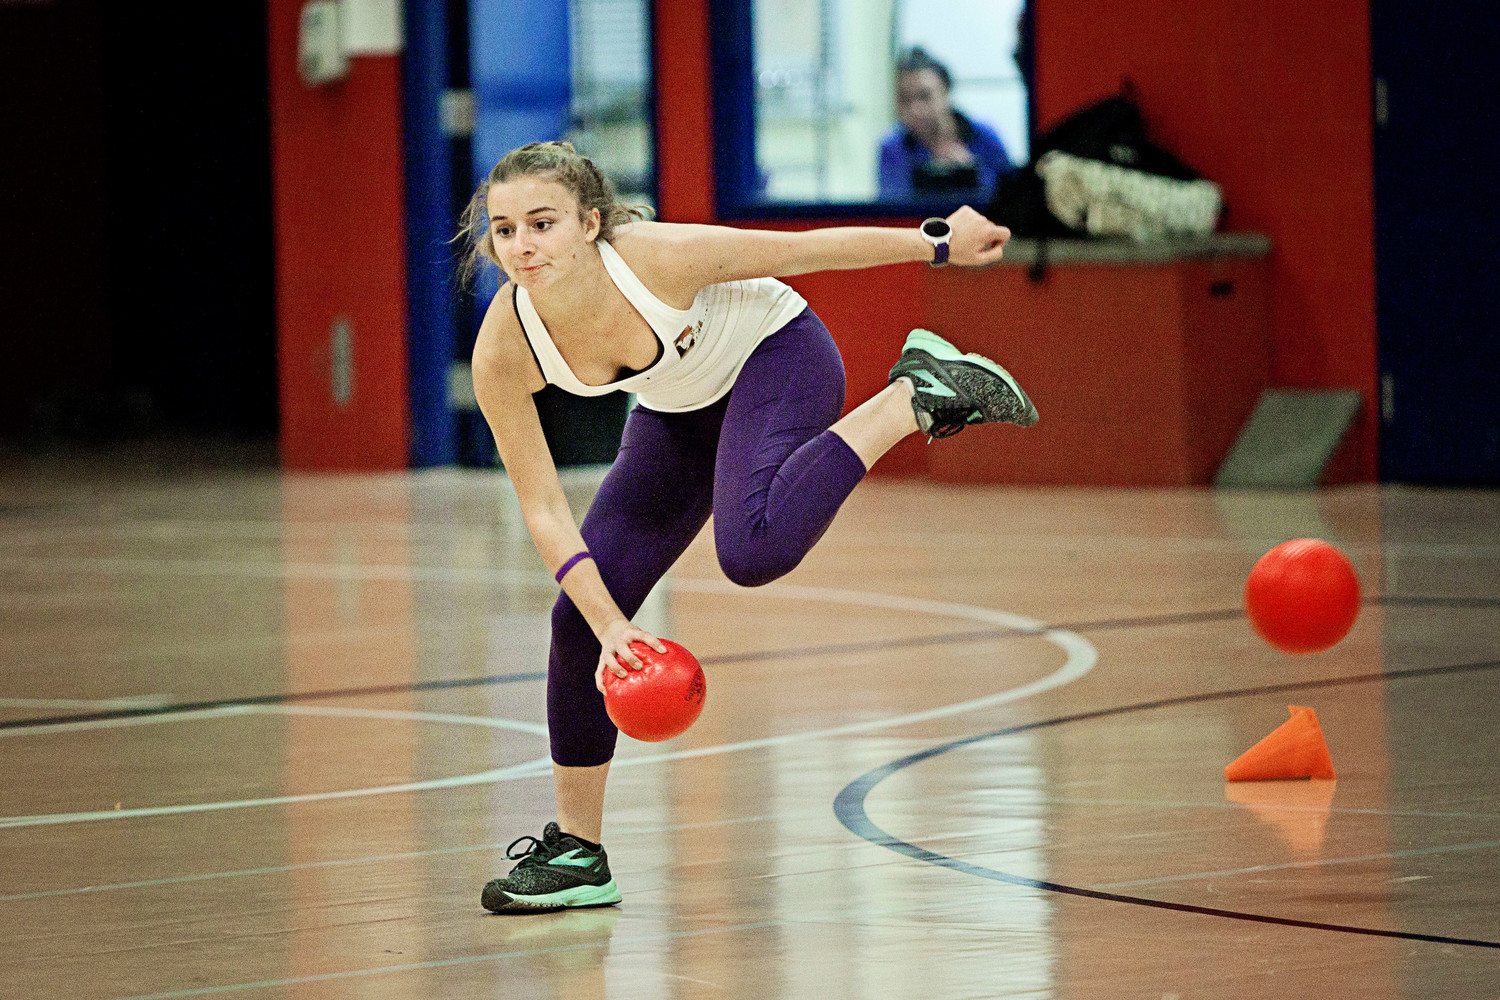 PHS junior Olive Allen, a member of the team Daughter’s of Rose, holds onto a ball while stepping over another.